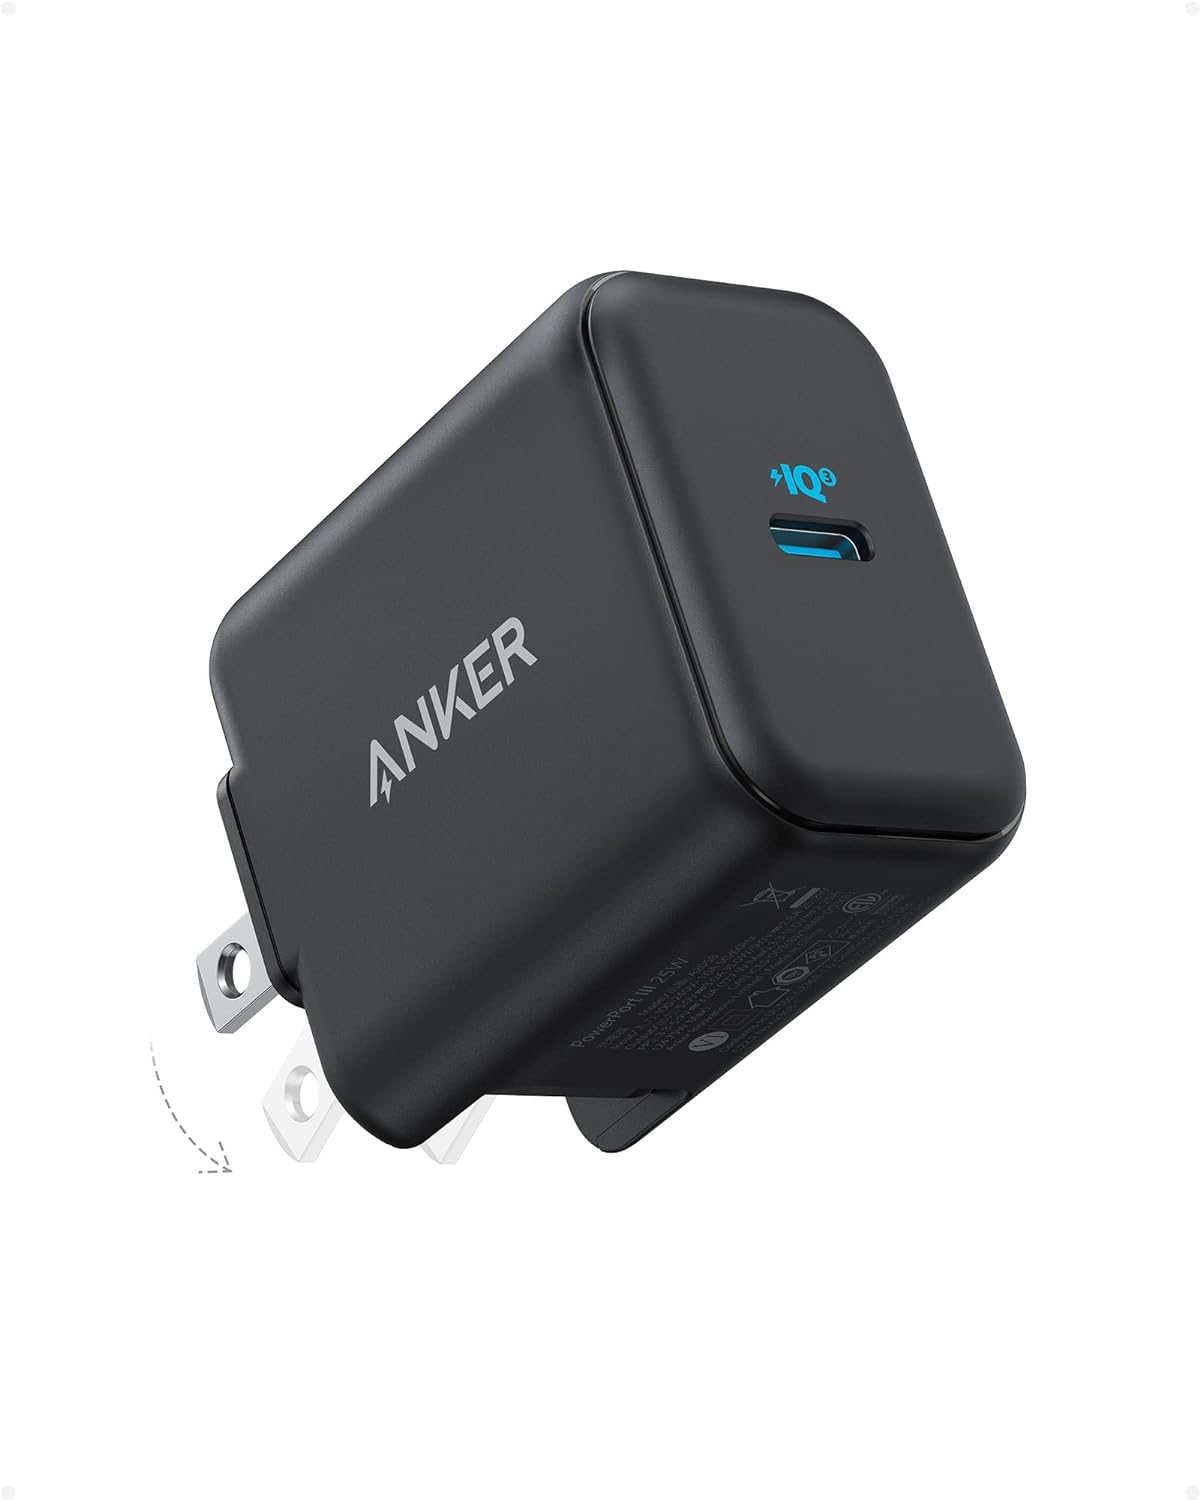 Prime Members: Anker 312 25W USB-C Super Fast Foldable Wall Charger $10 + Free Shipping